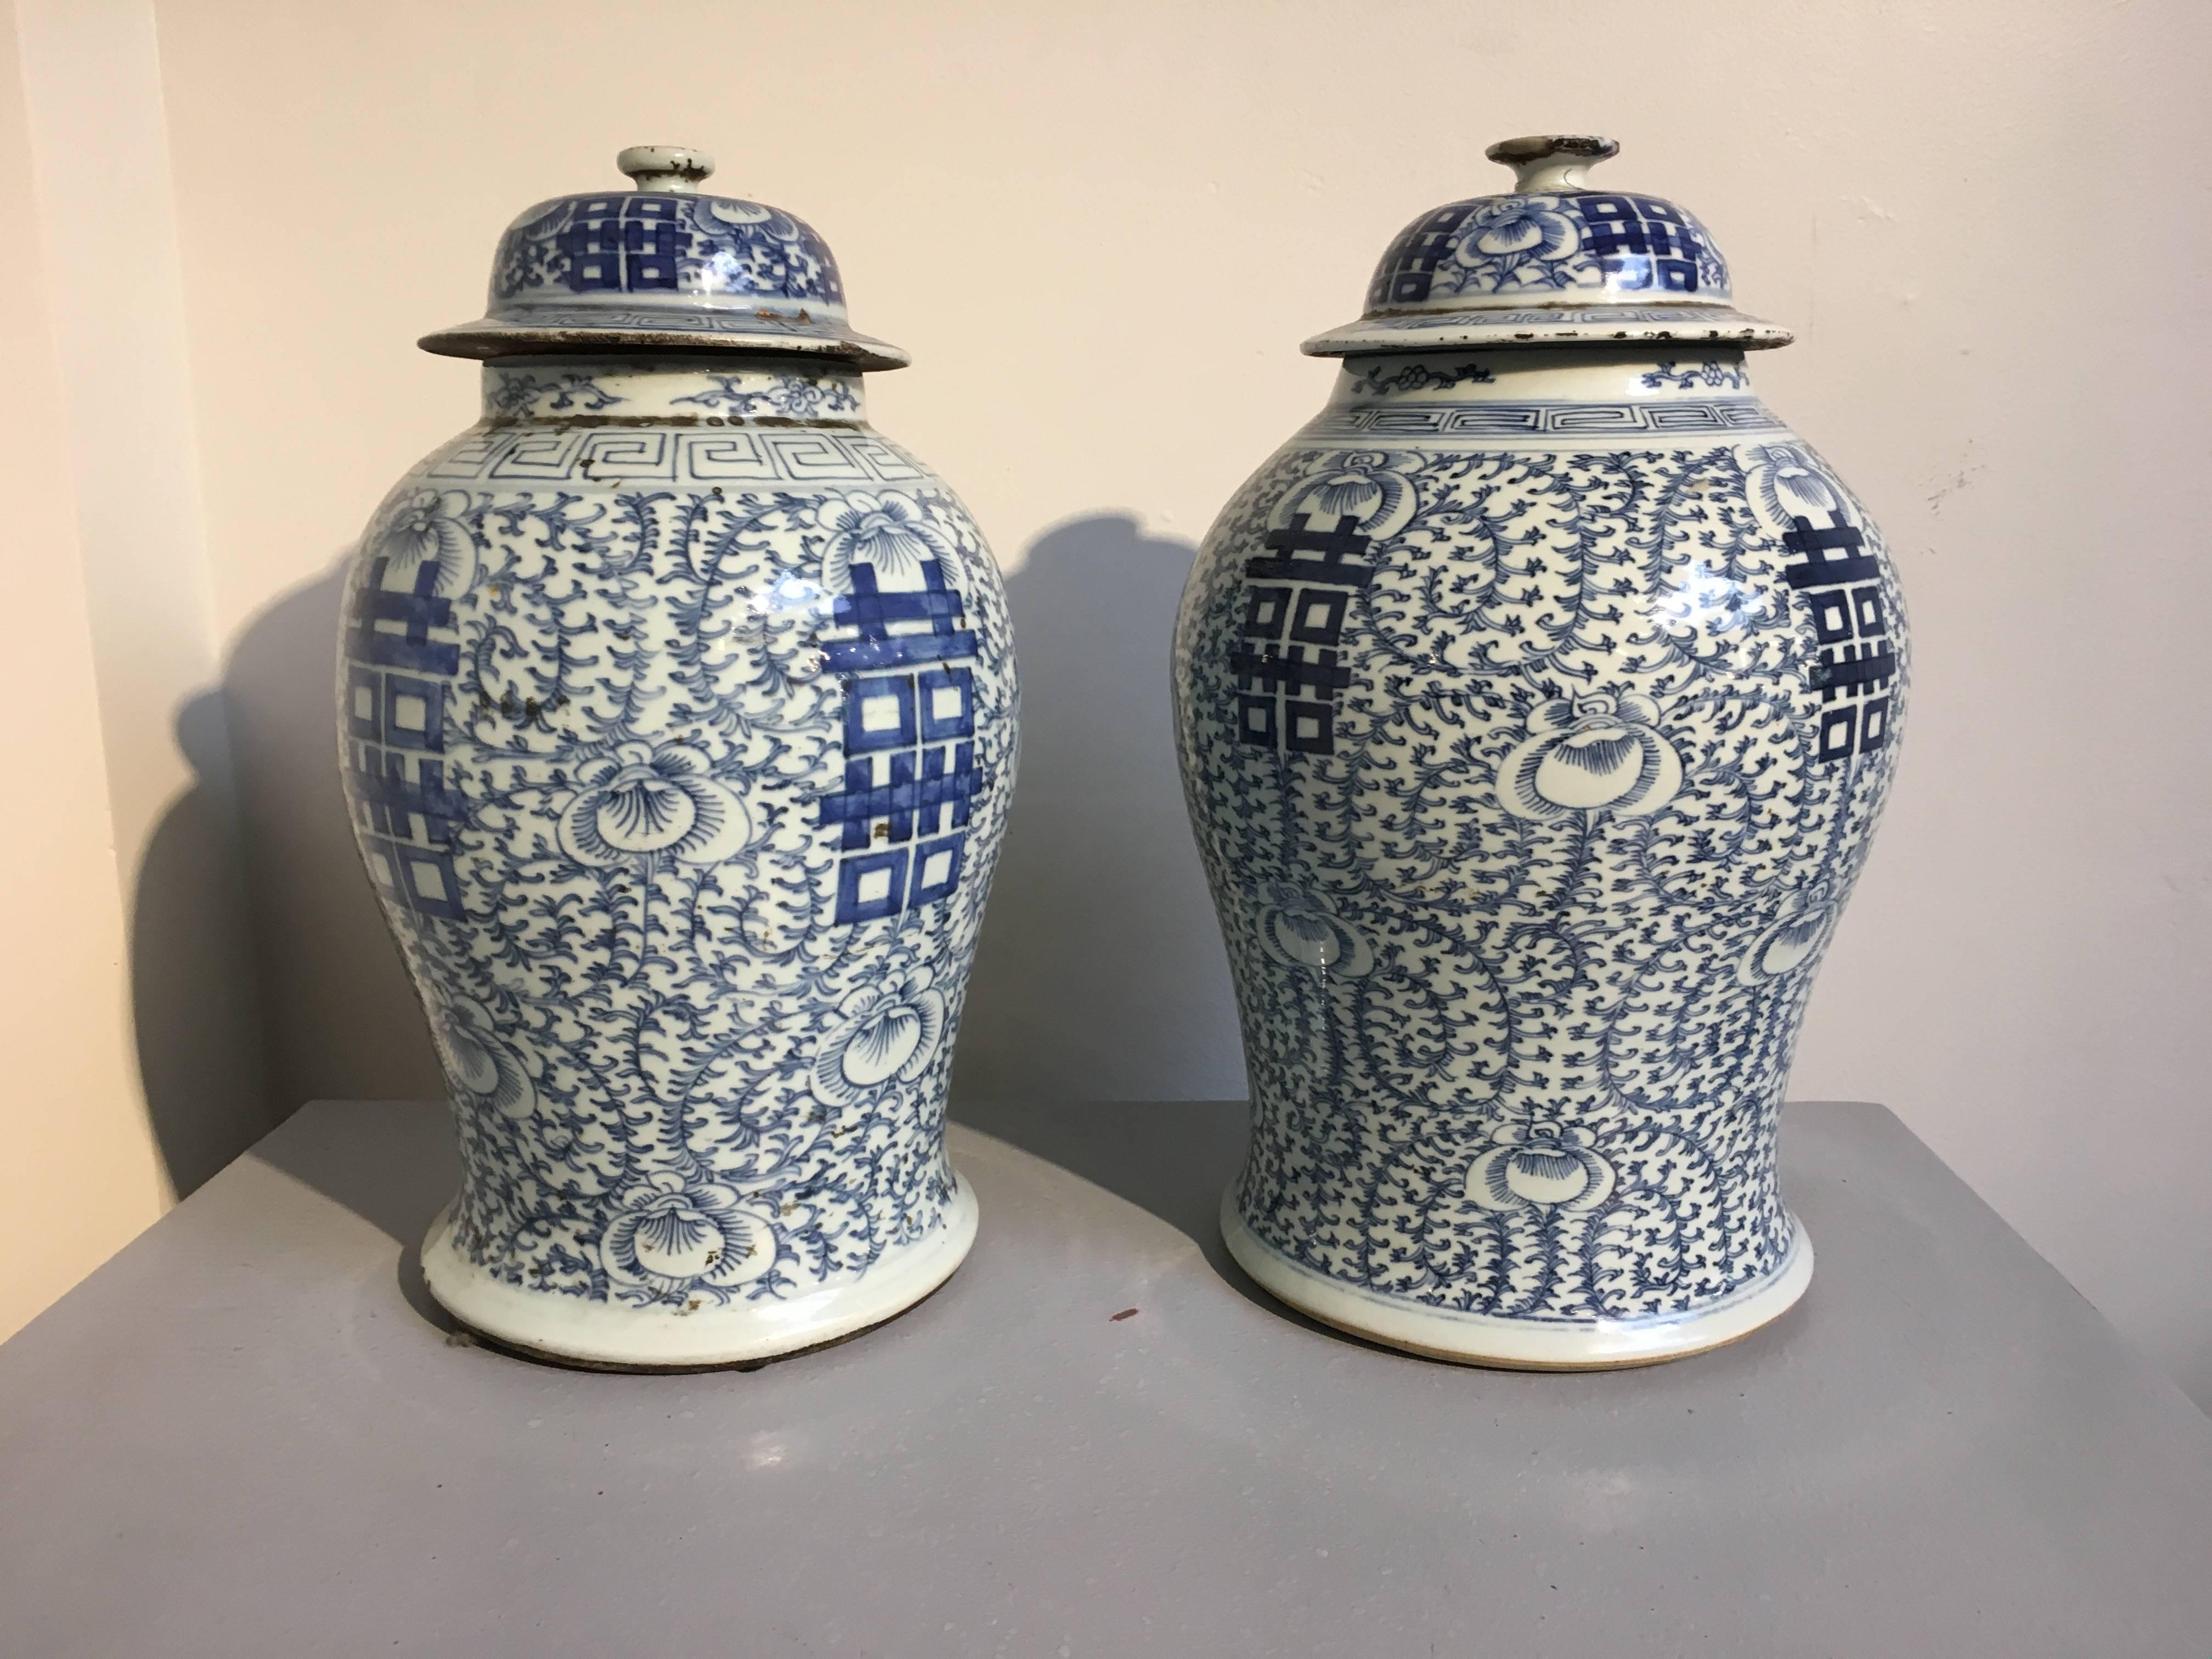 A near pair of Classic Chinese blue and white covered temple jars. The jars of elegant baluster form, painted in rich cobalt blue with large Chinese double happiness characters and intricate scrolling floral and foliate pattern against a white